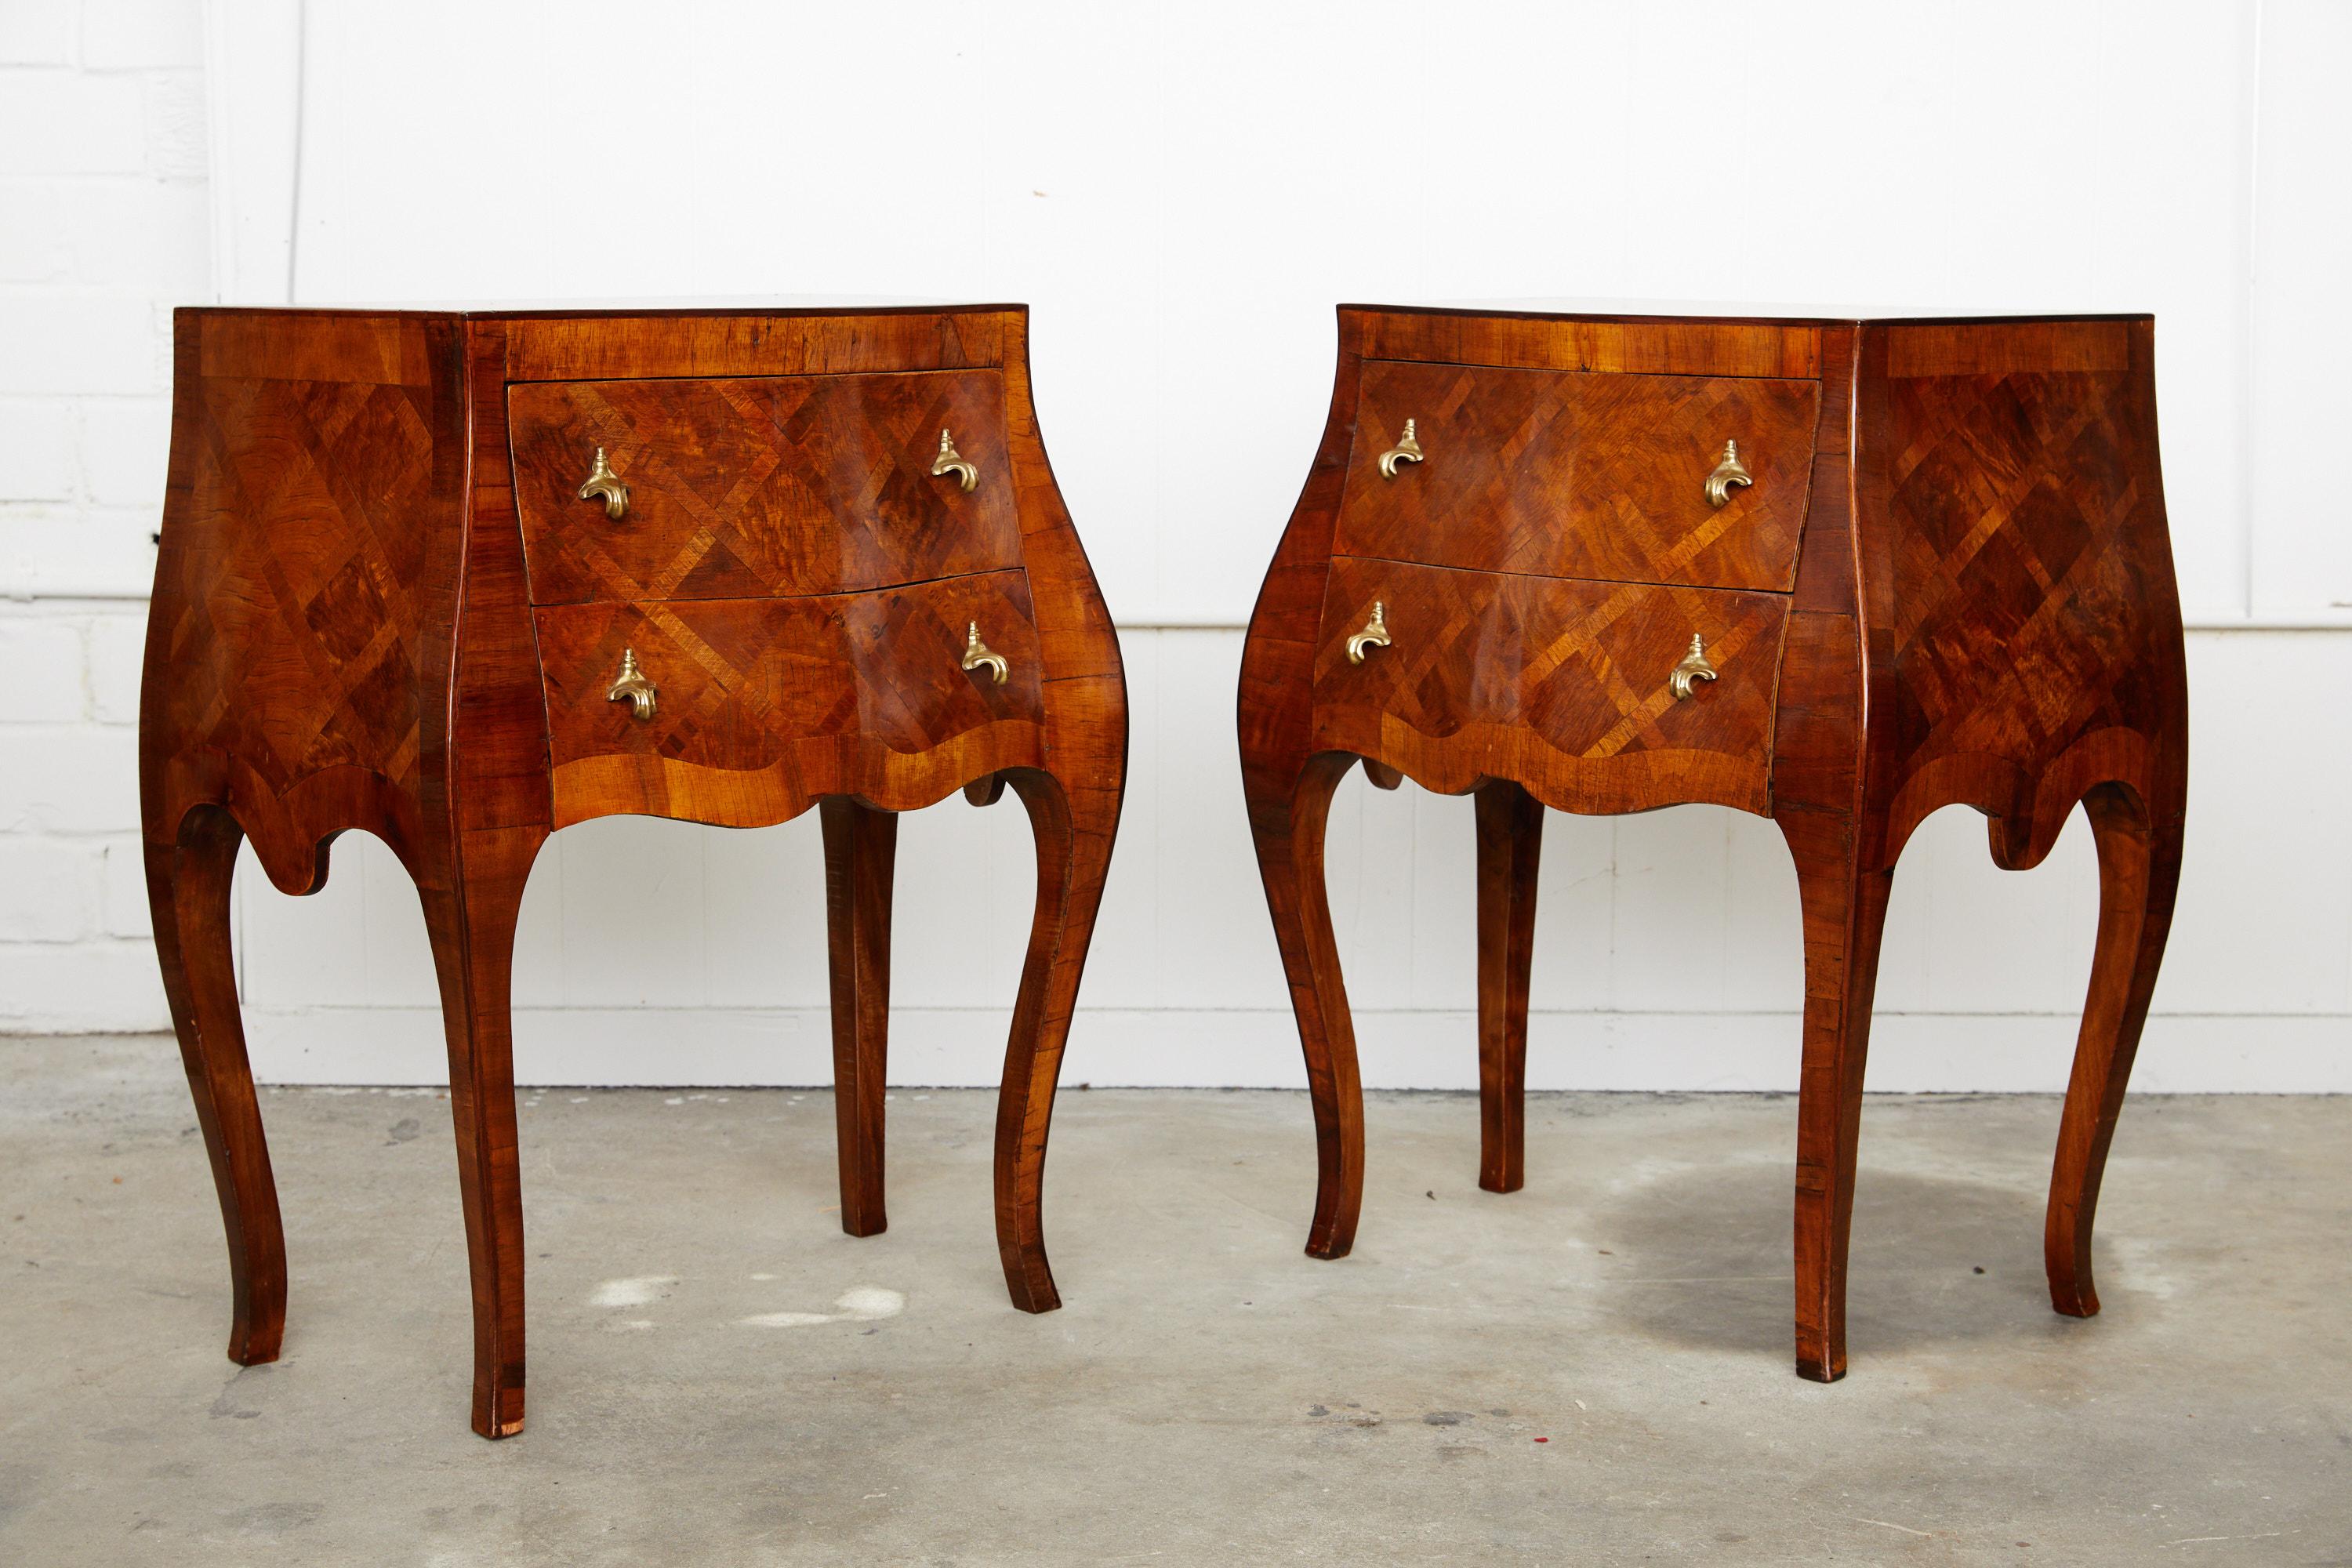 20th century pair of Italian commodinis or end tables in a bombe form holding two drawers, each with rococo style brass hardware. The tables are decorated in a marquetry inlay.